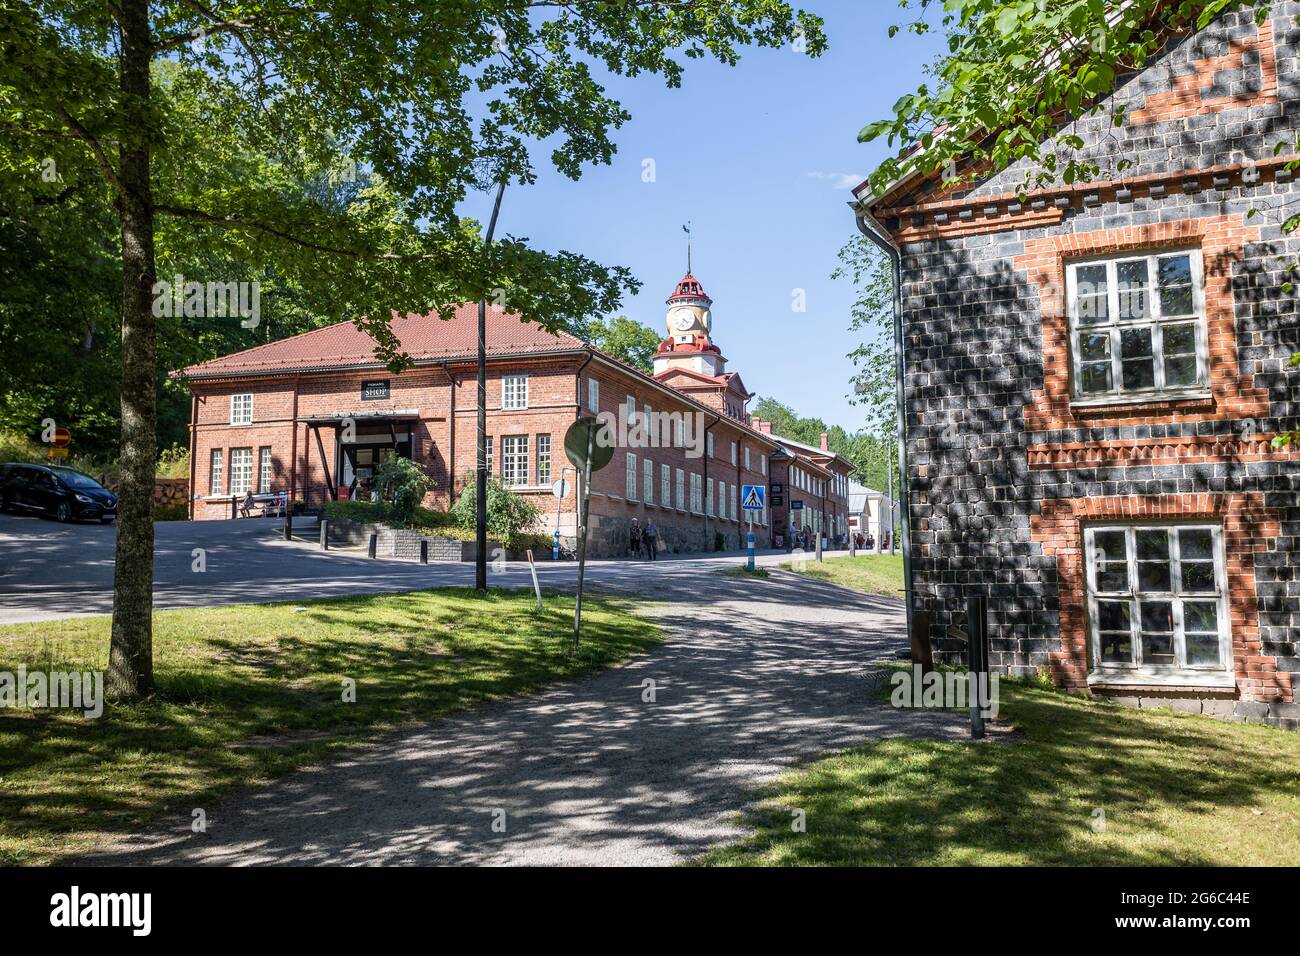 https://c8.alamy.com/comp/2G6C44E/the-clock-tower-building-in-fiskars-village-a-historical-ironworks-area-and-popular-travel-destination-in-southern-fin-2G6C44E.jpg